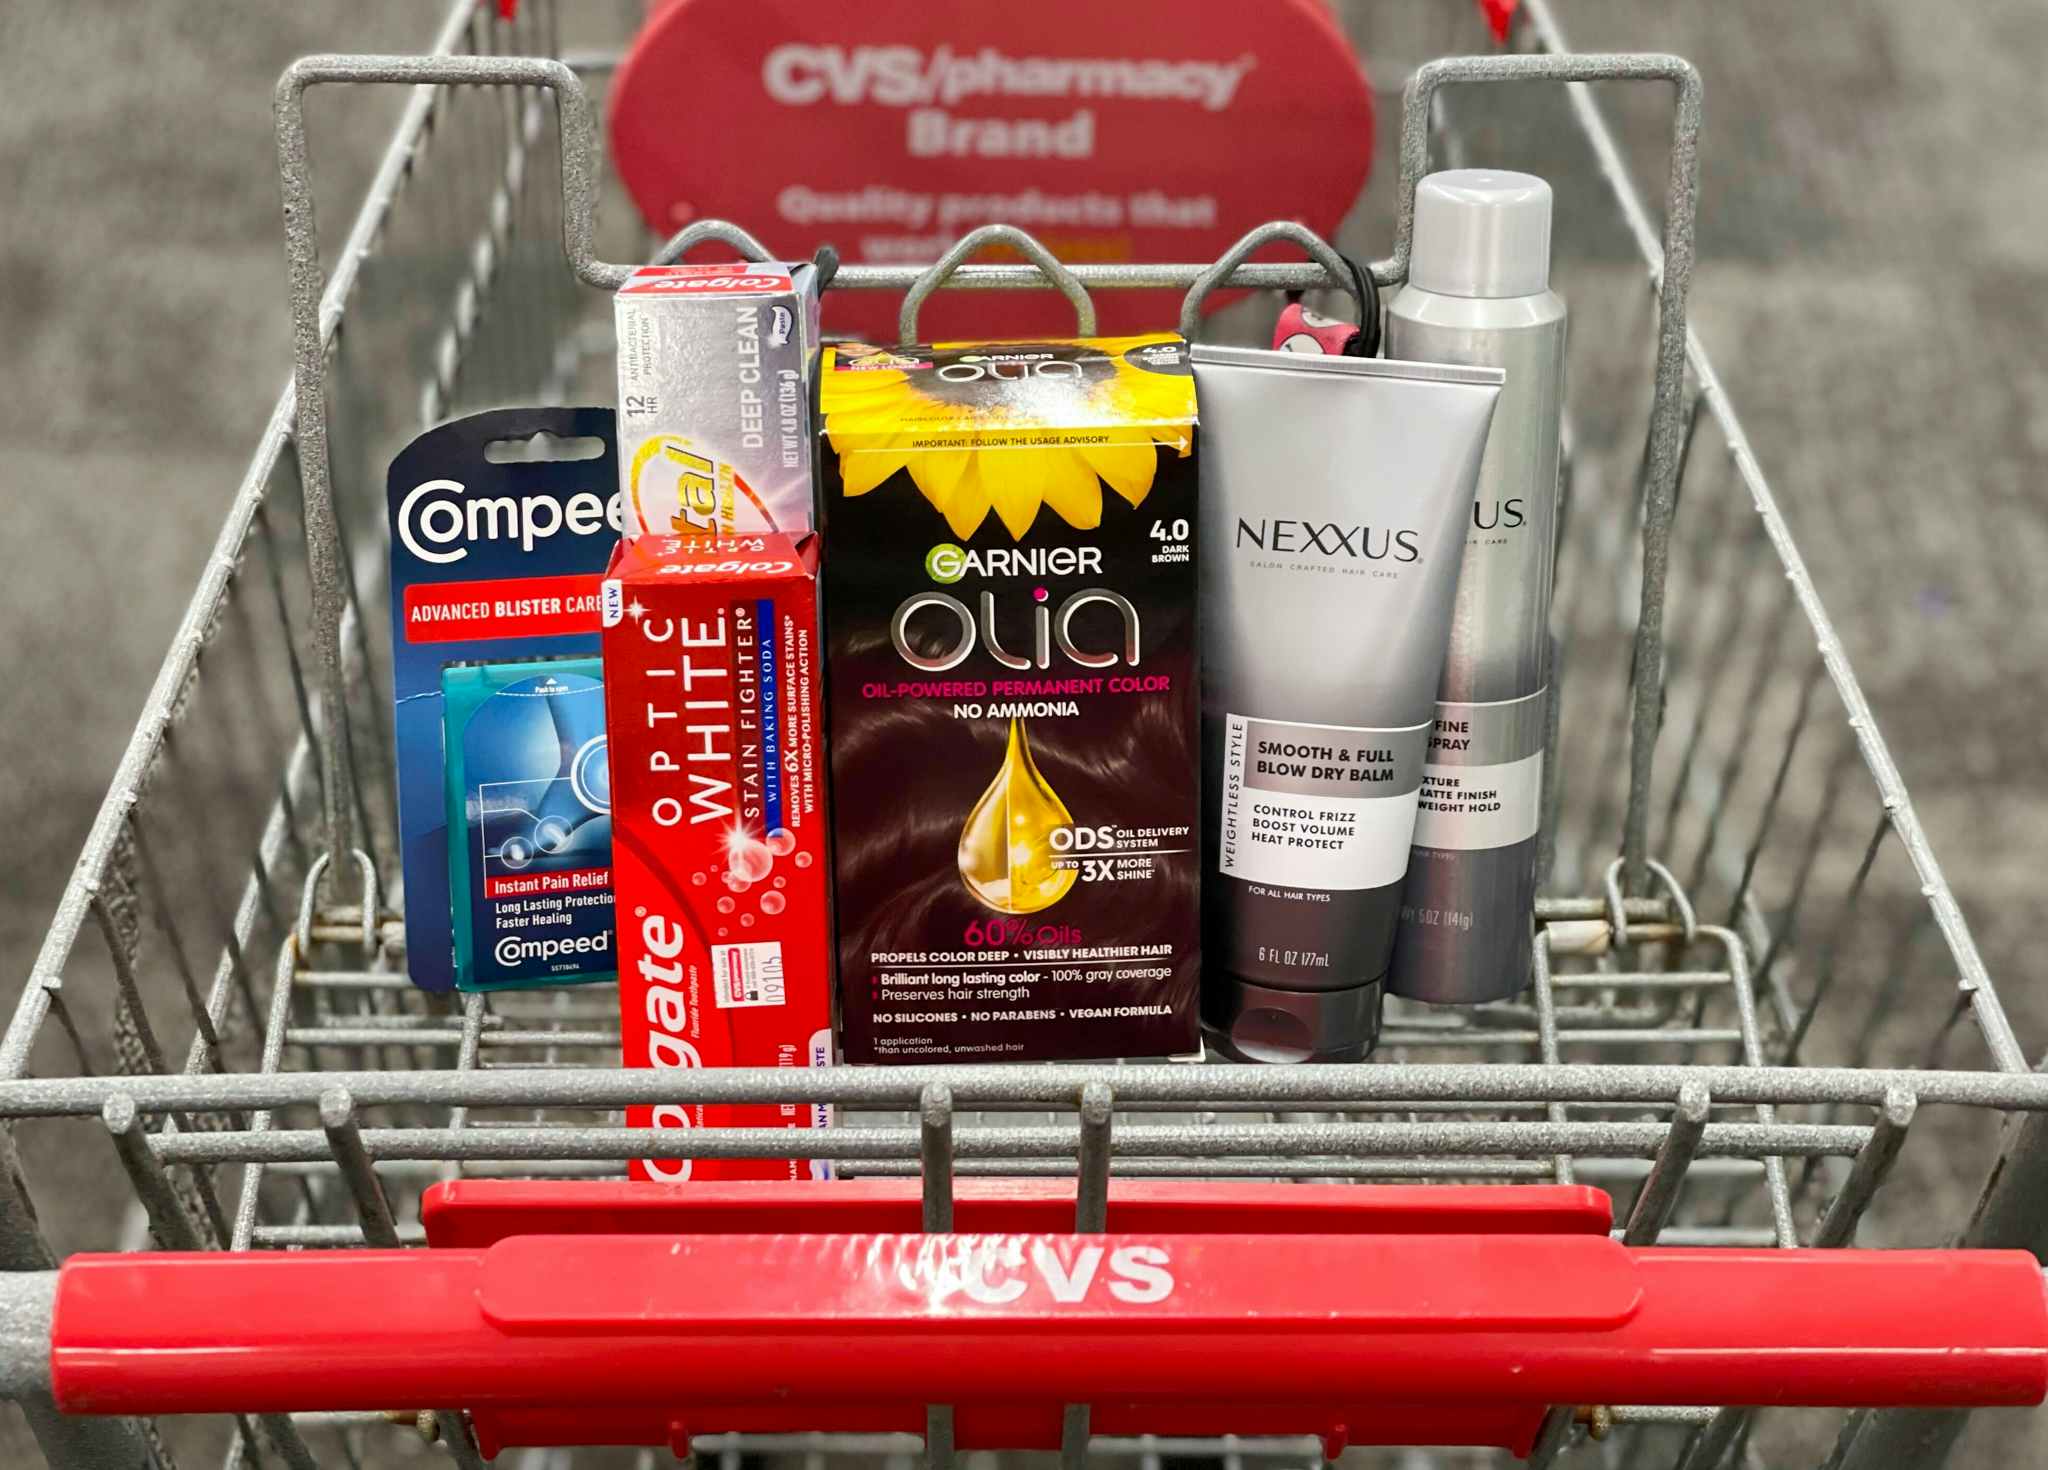 garnier olia and more products in cvs shopping cart